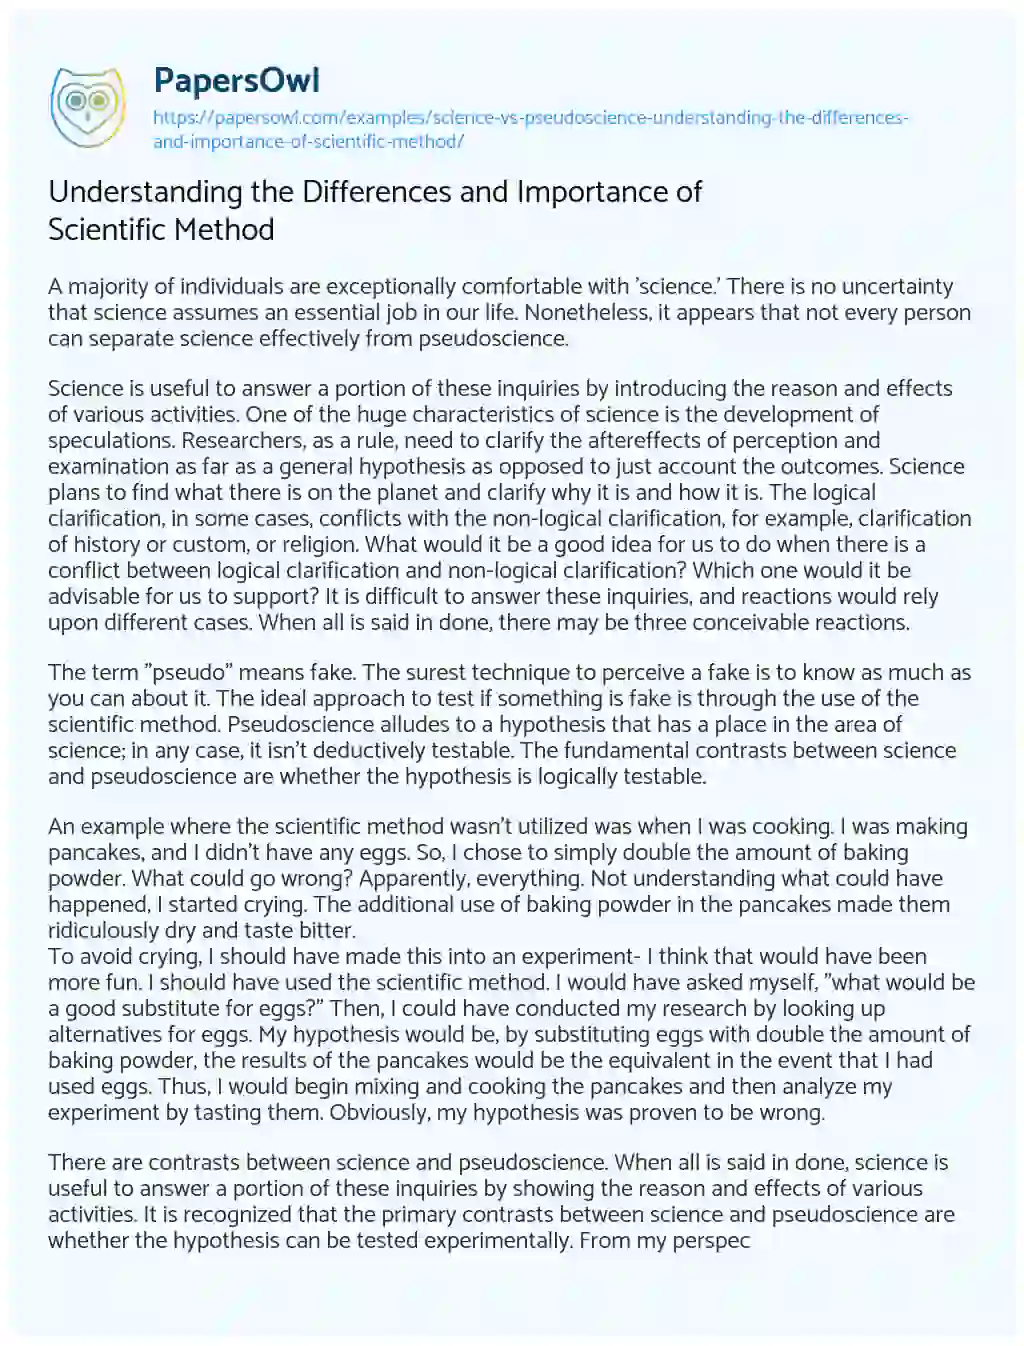 Essay on Understanding the Differences and Importance of Scientific Method